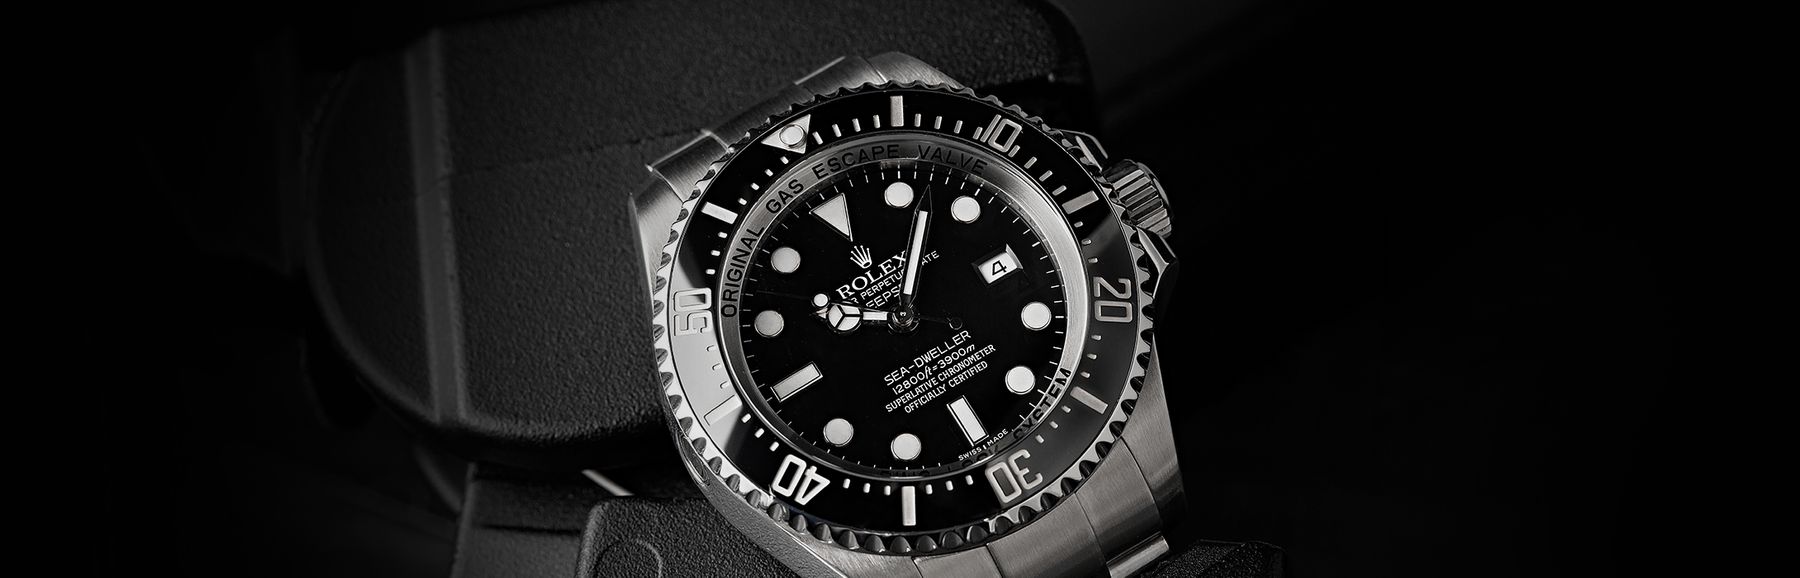 How Accurate Are Rolexes?